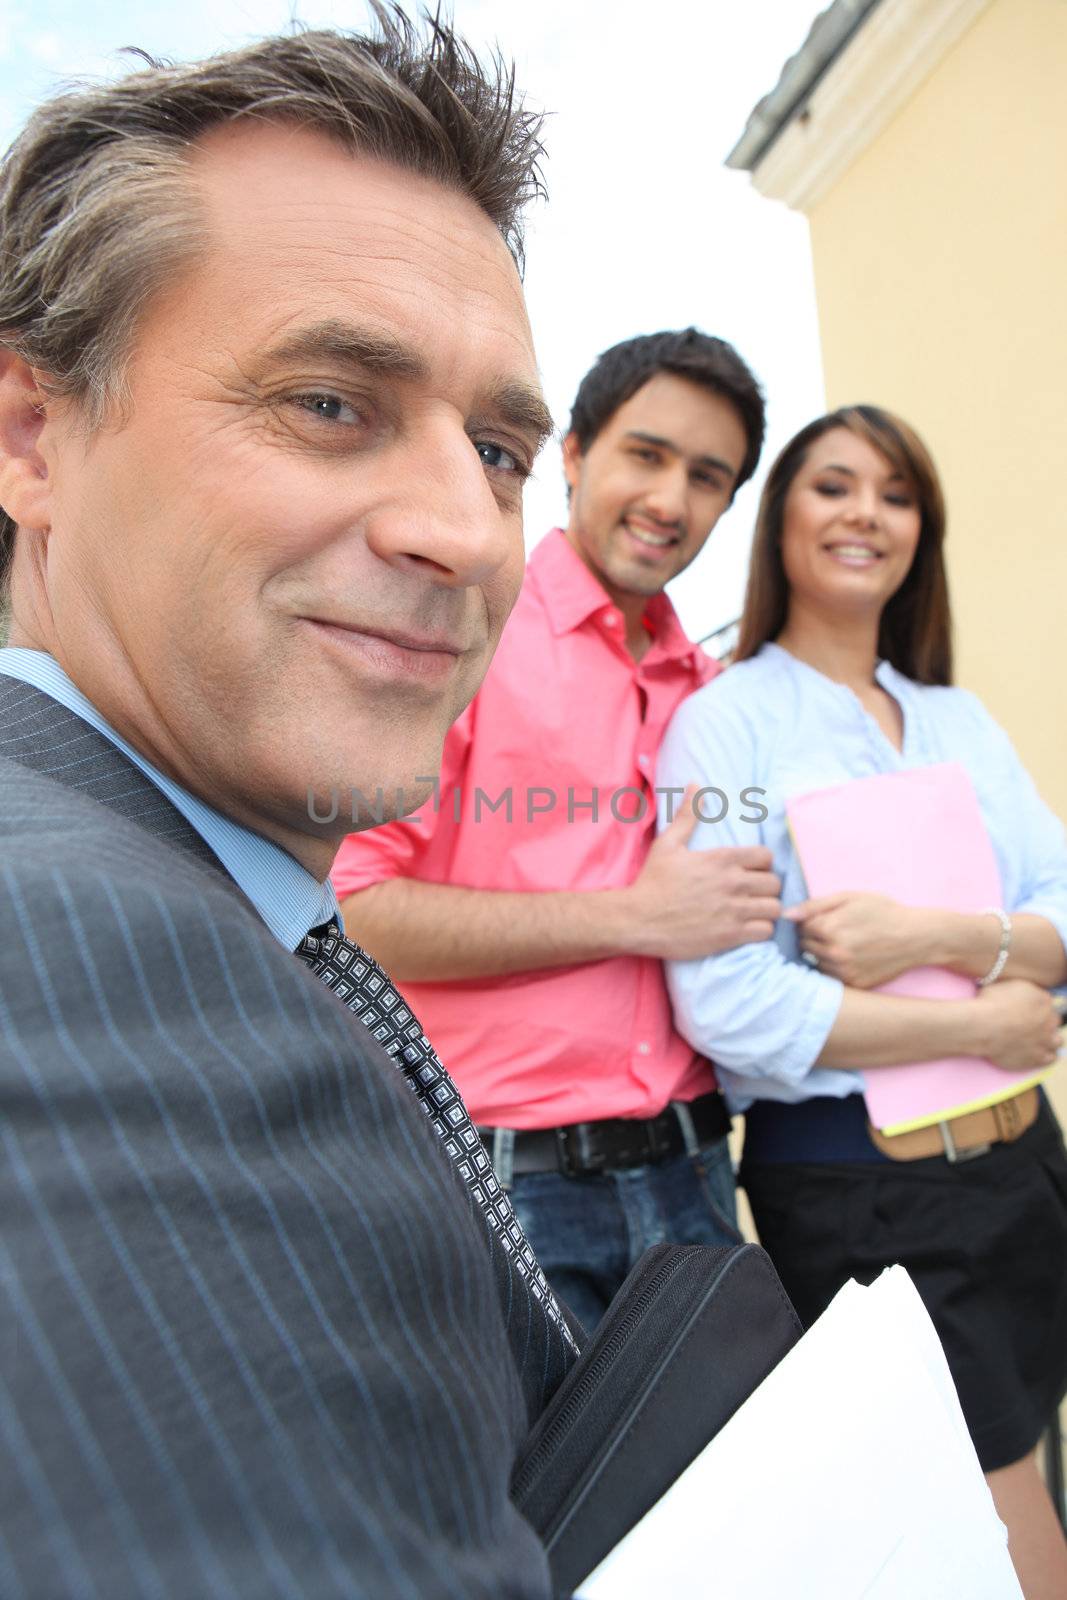 Estate-agent about to show couple round a property